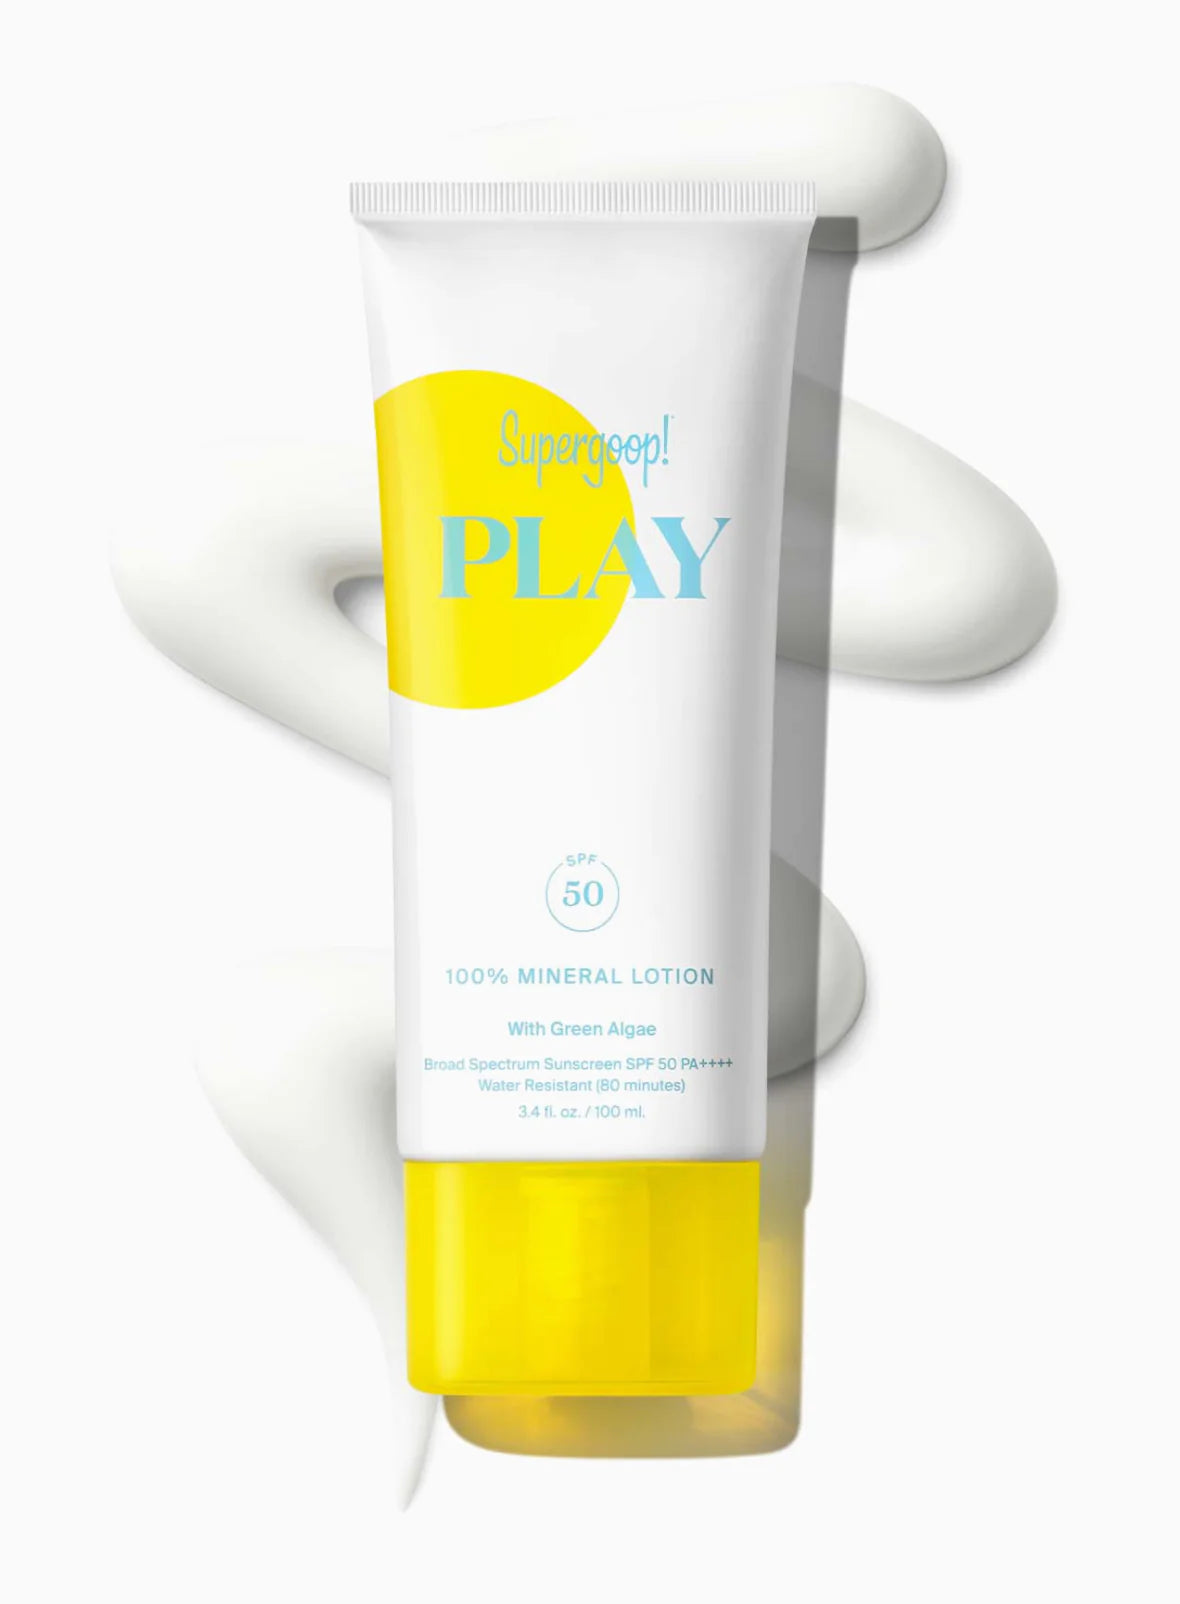 PLAY 100% Mineral Lotion SPF with Green Algae